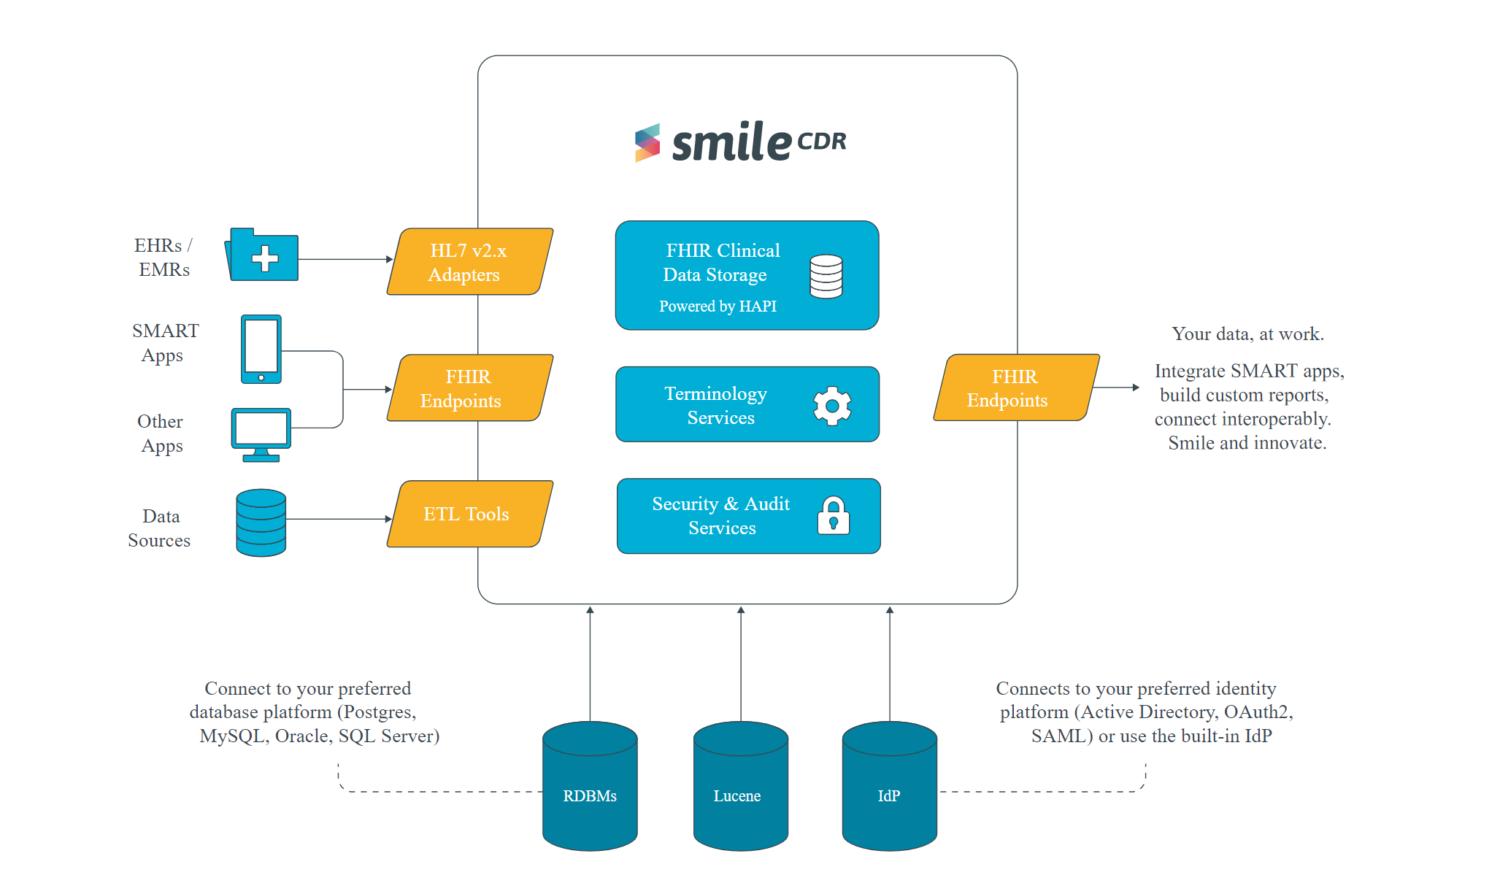 Smile CDR Raises $20M to Expand FHIR-Driven Data Liberation Platform for Interoperability